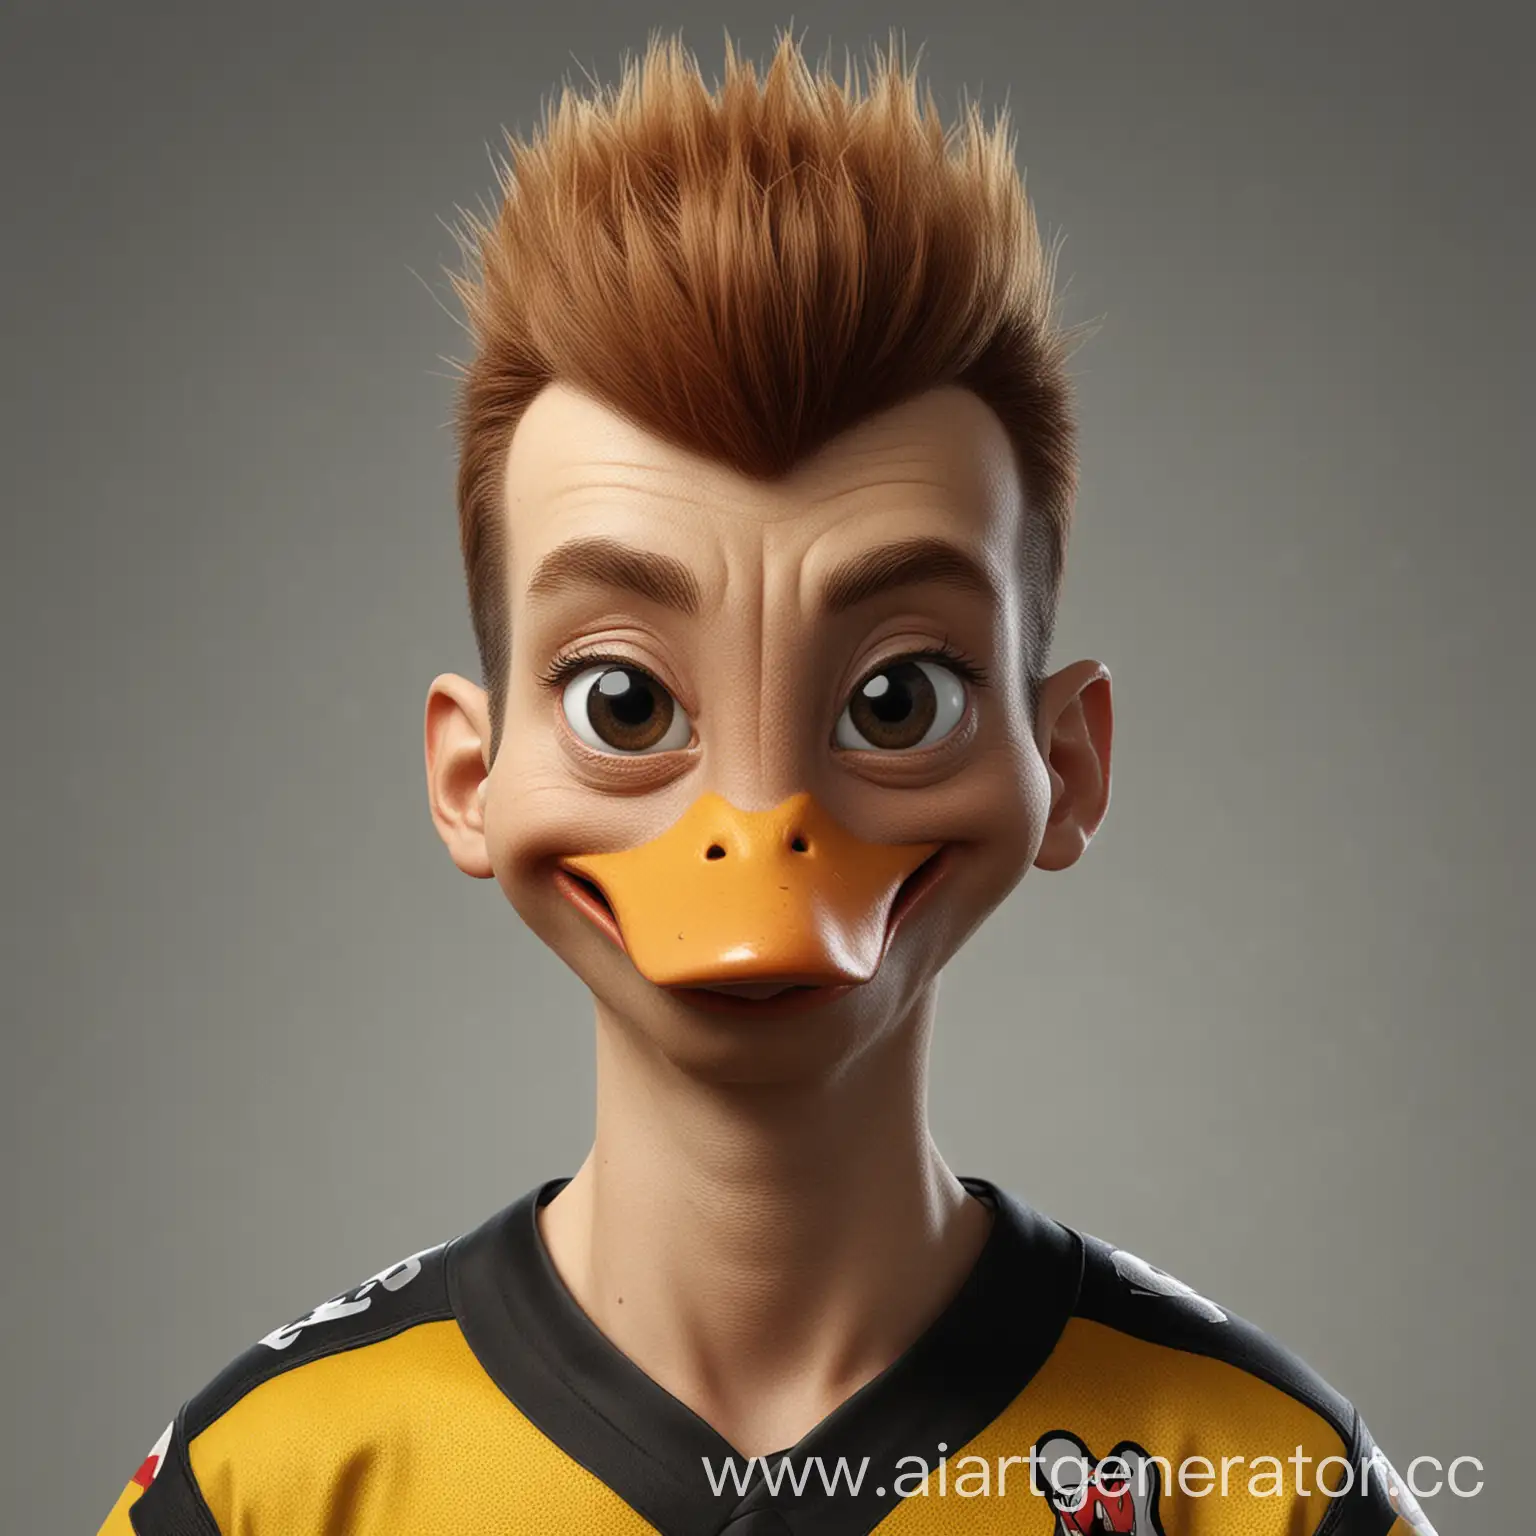 PhotoRealistic-Humanized-Woody-Woodpecker-Portrait-in-Football-Uniform-BSC-Young-Boys